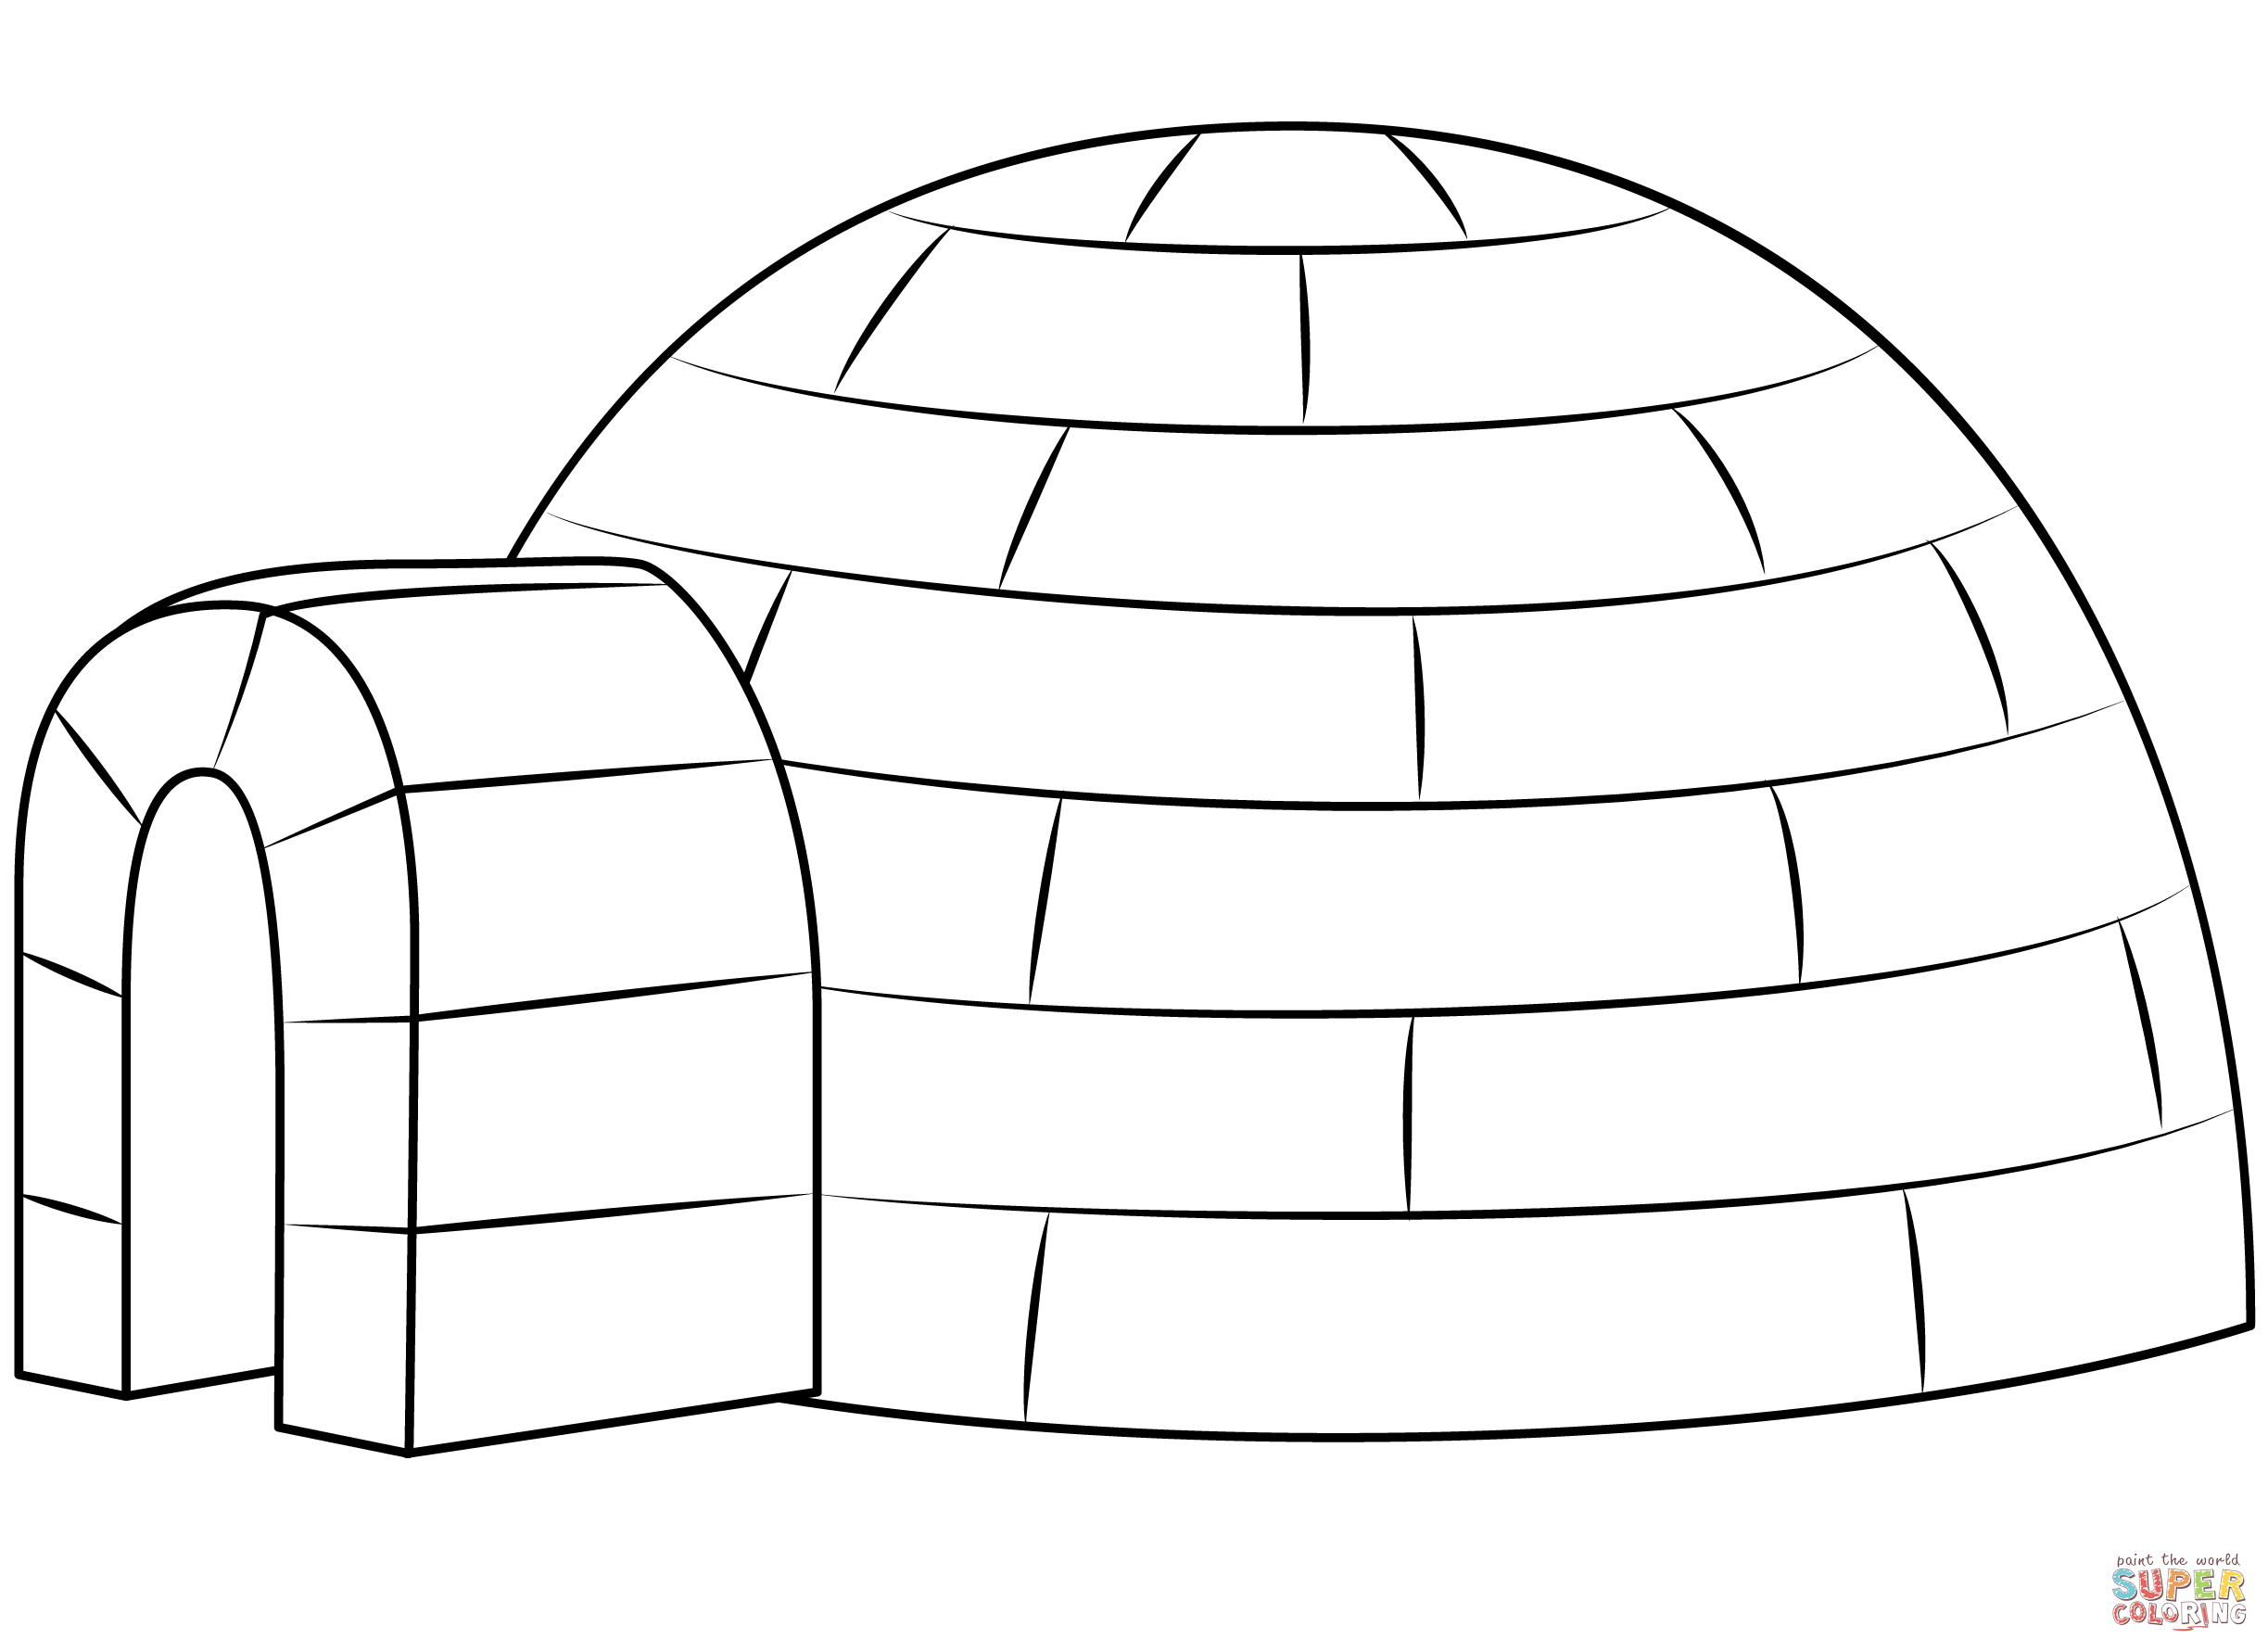 Igloo coloring page free printable coloring pages